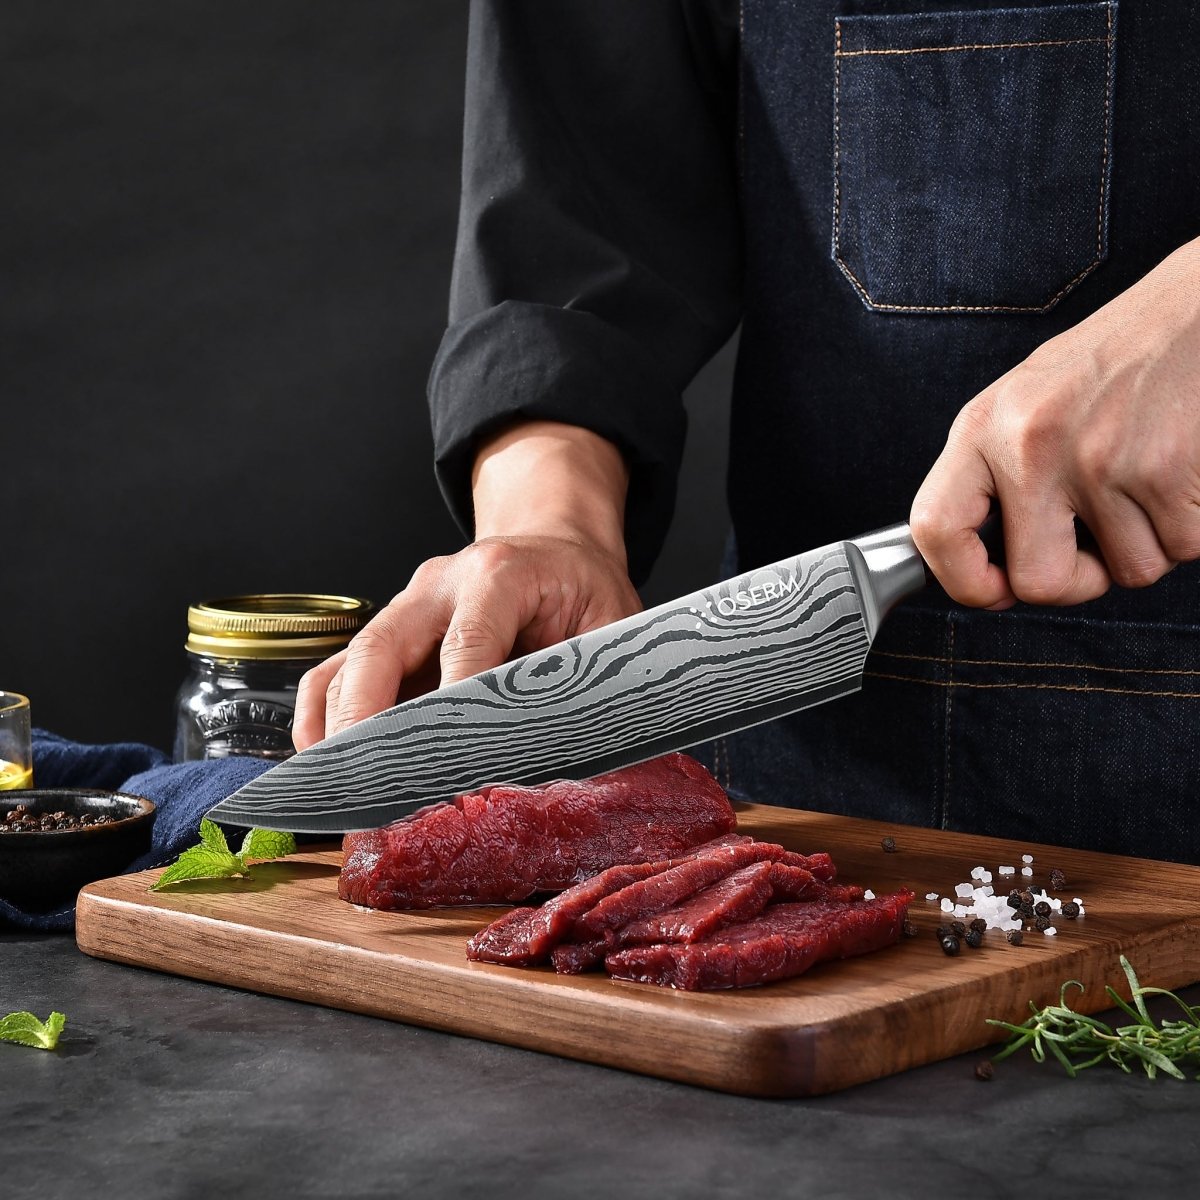 OSERM 3+1 Mystery Knife Set: Unveil Your Surprise with Premium High Carbon Stainless Steel Chef Knives & Exclusive Blind Box Bonus